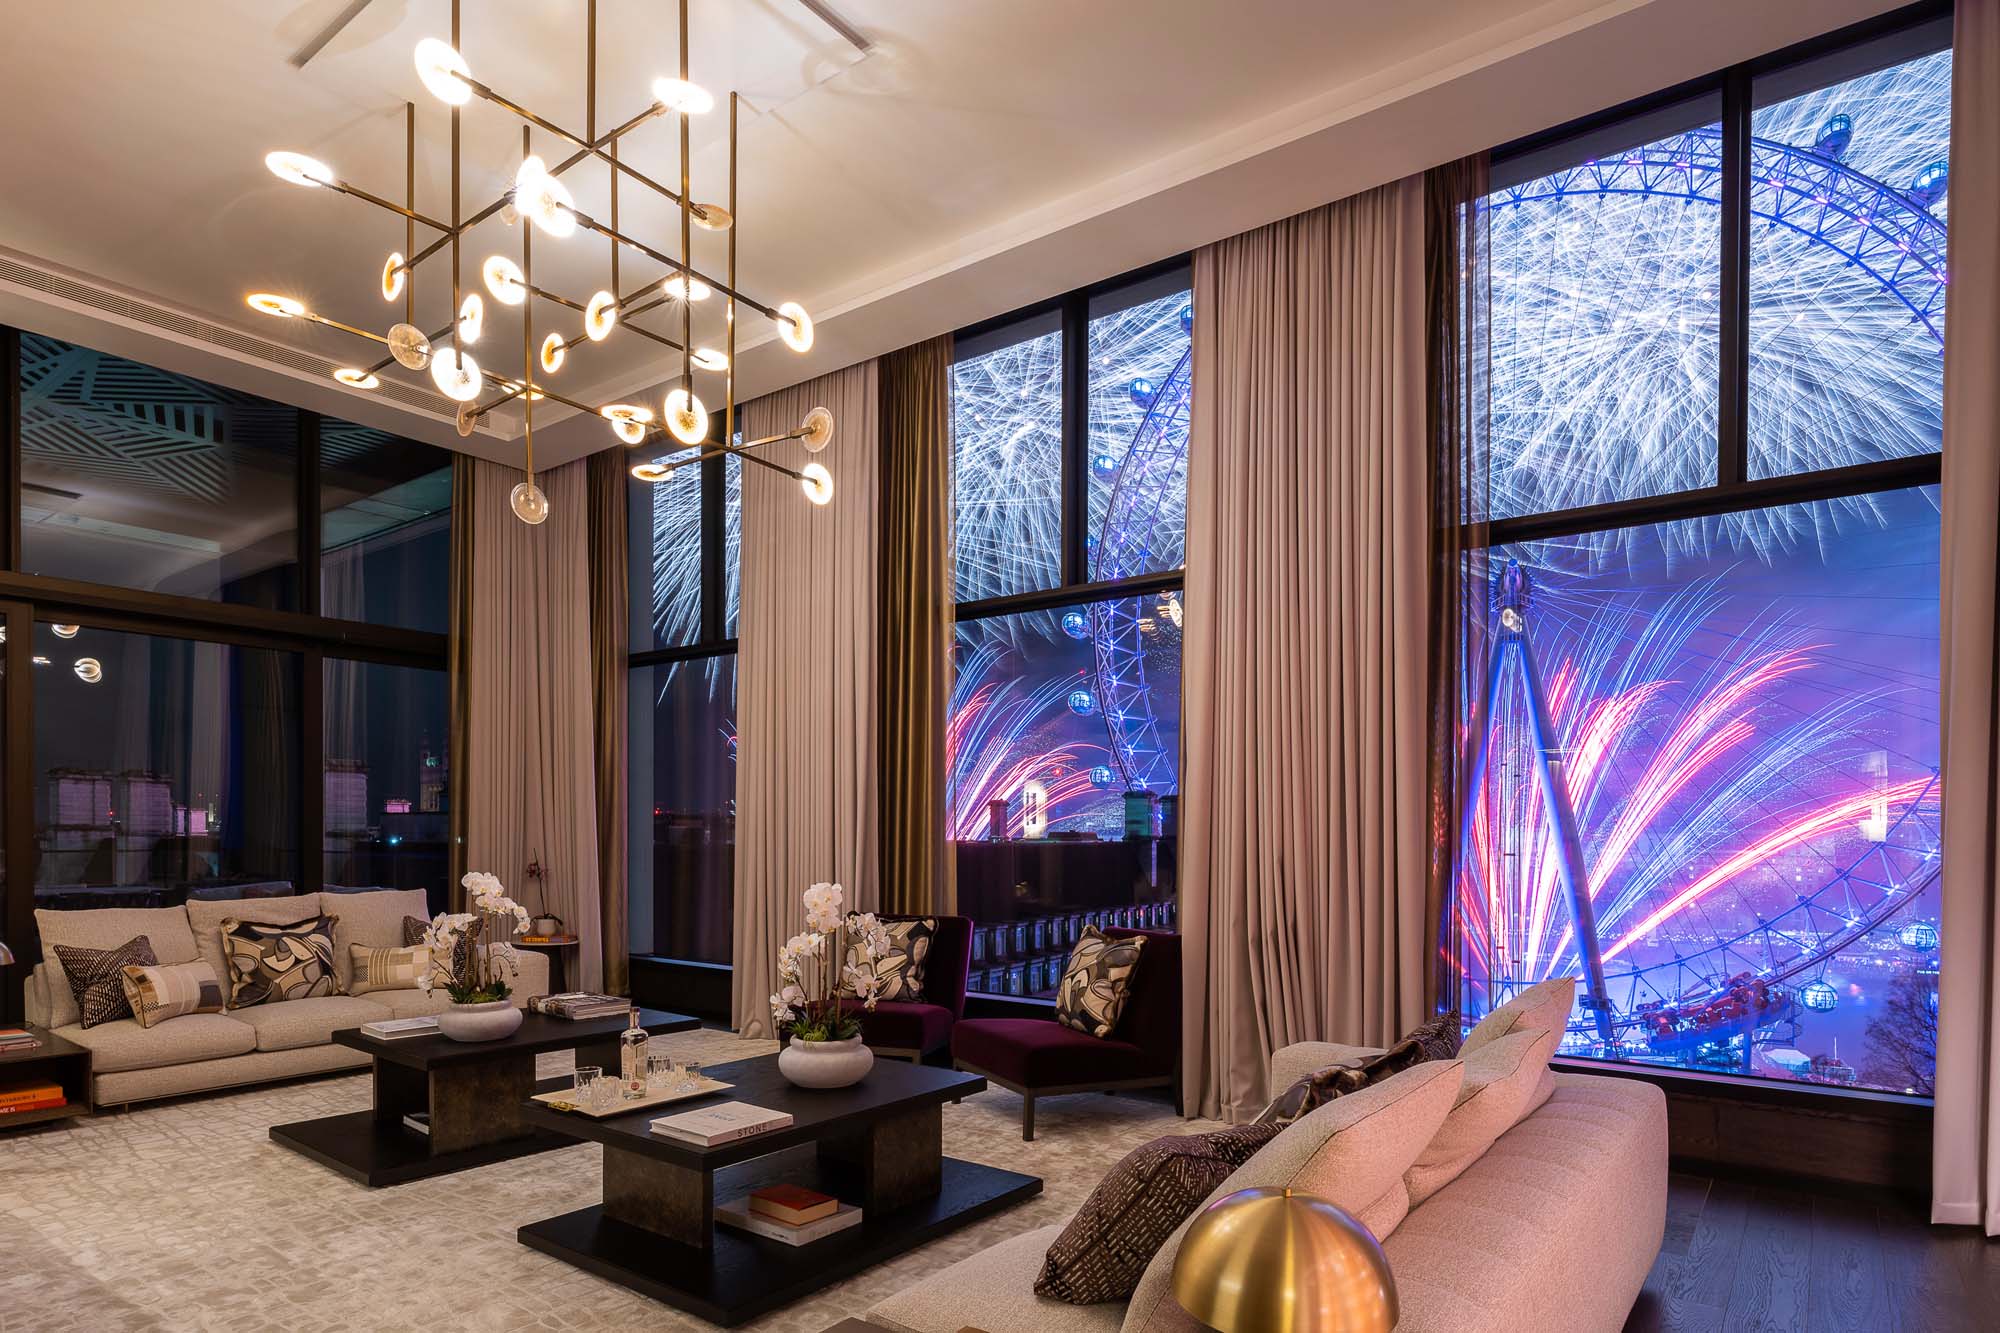 London's penthouses continue to be the height of luxury for the ultra-rich